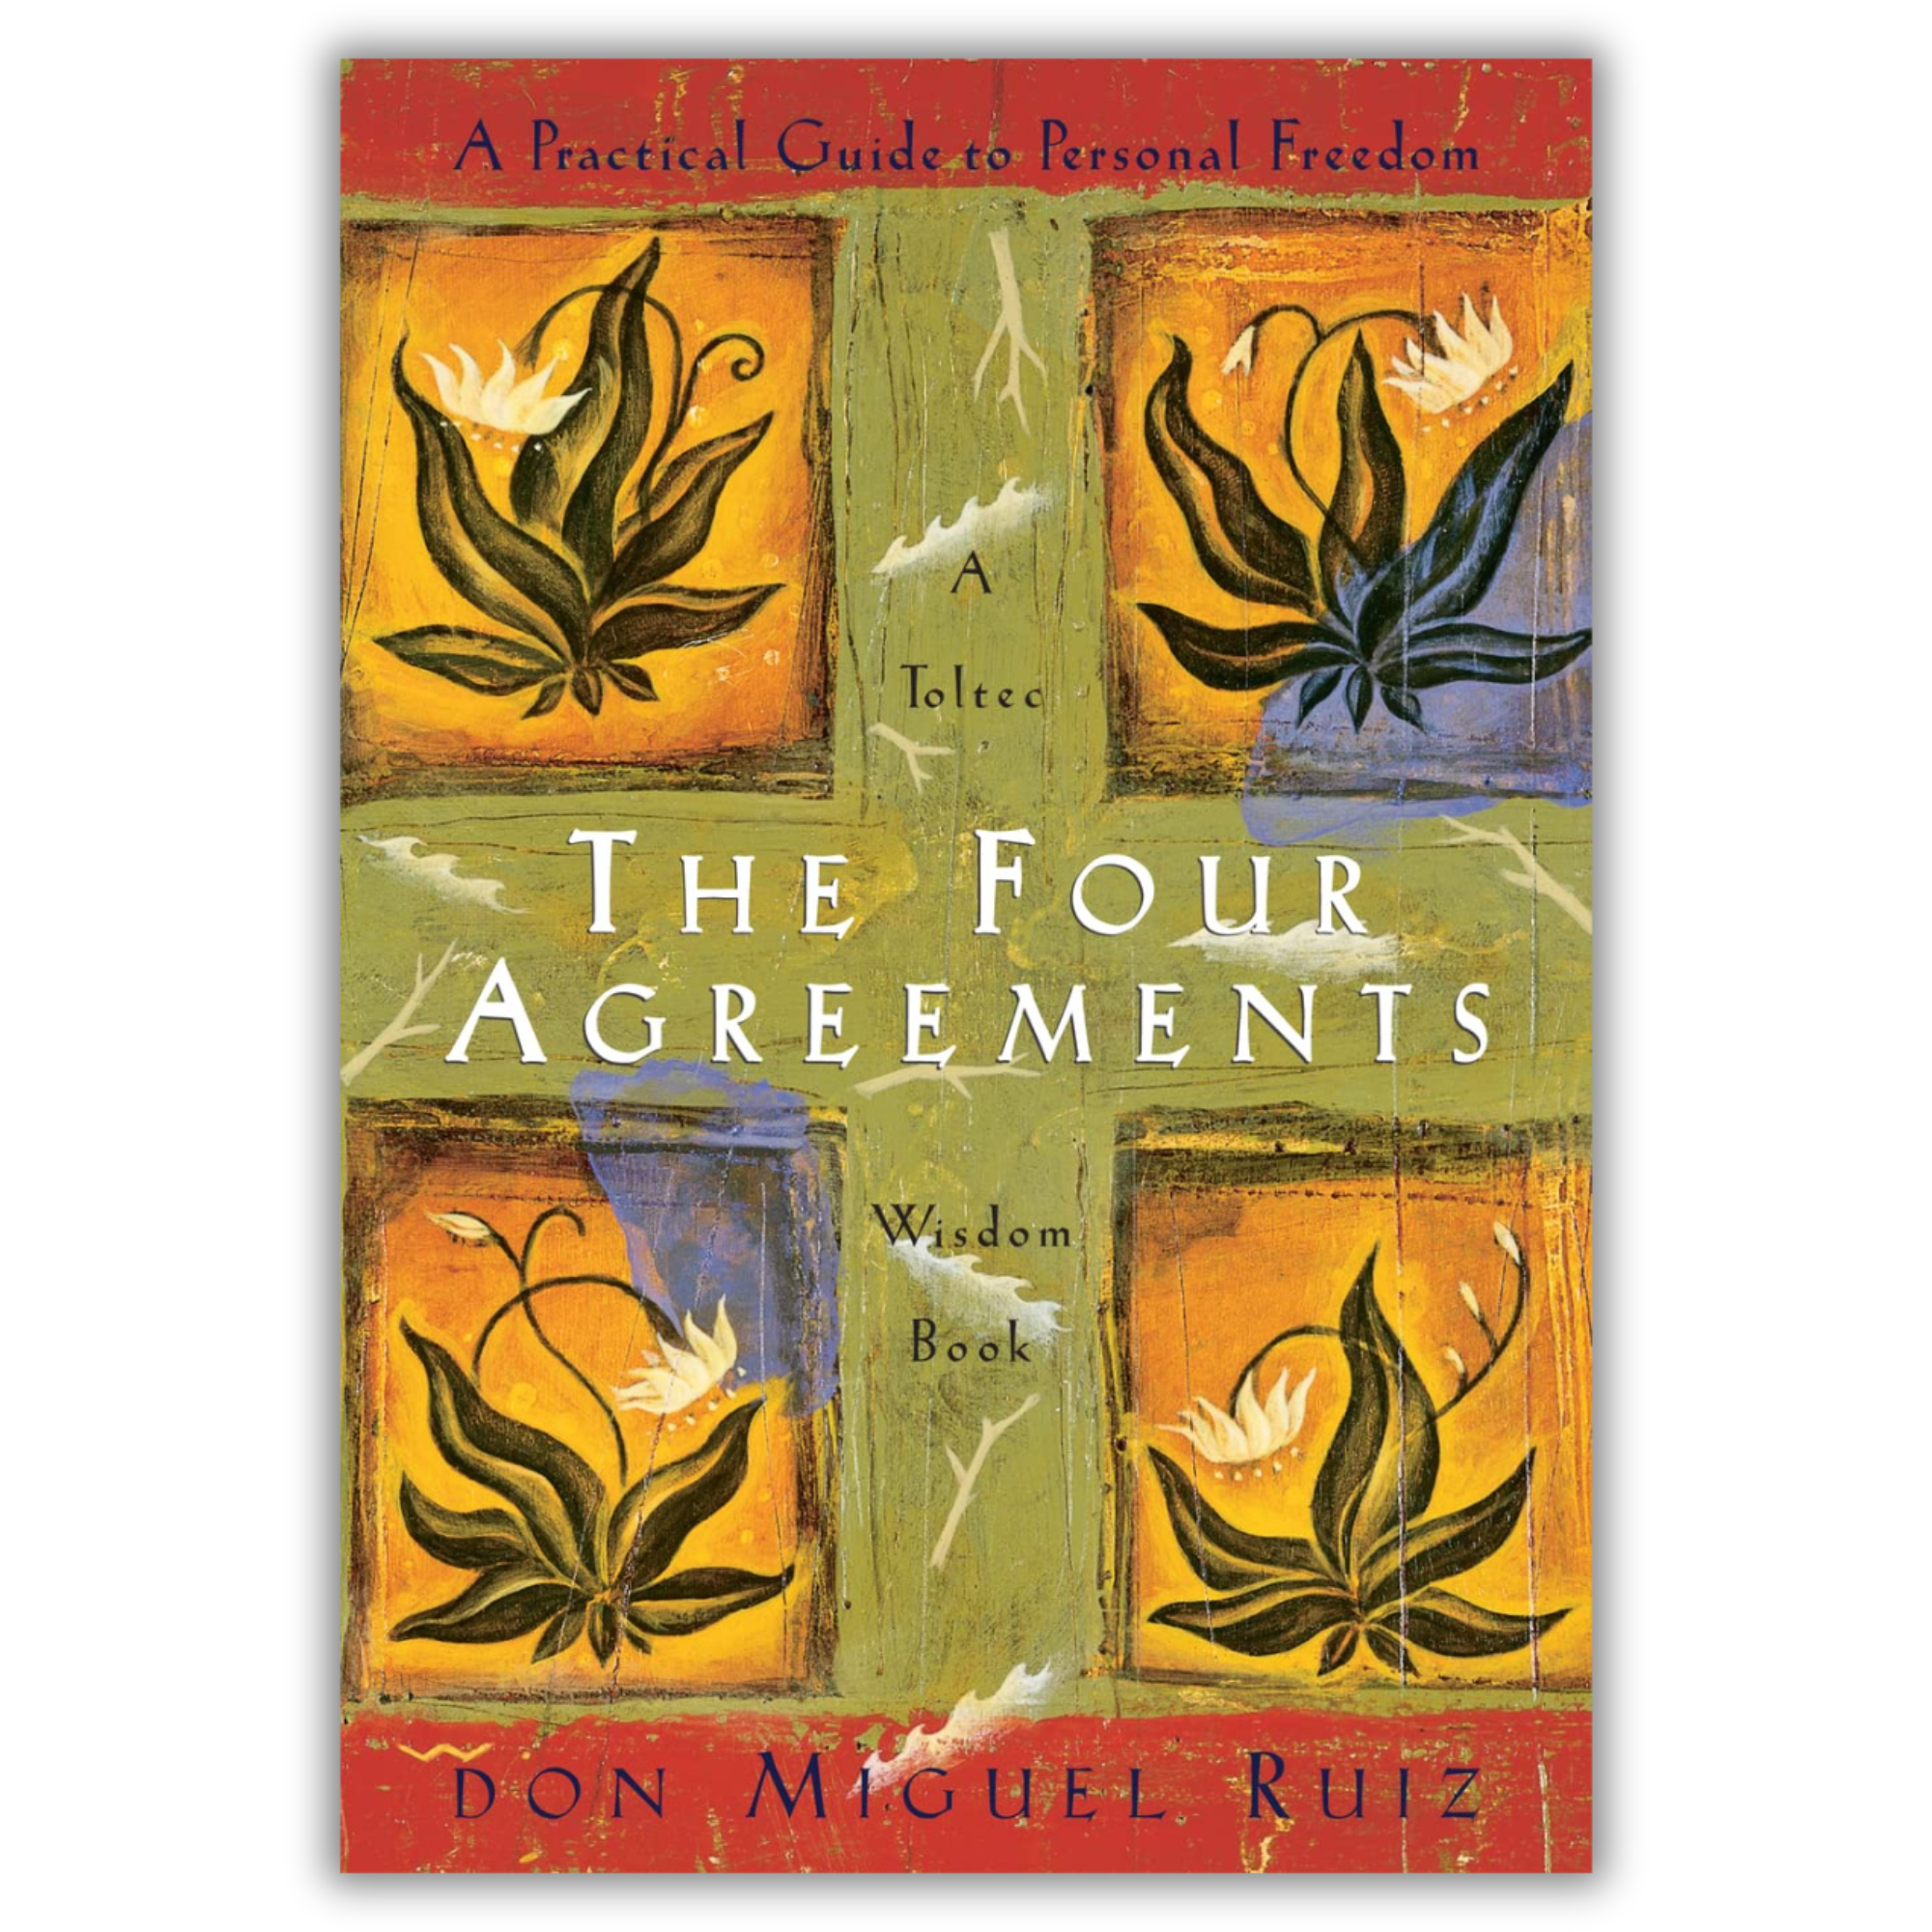 'The Four Agreements' book